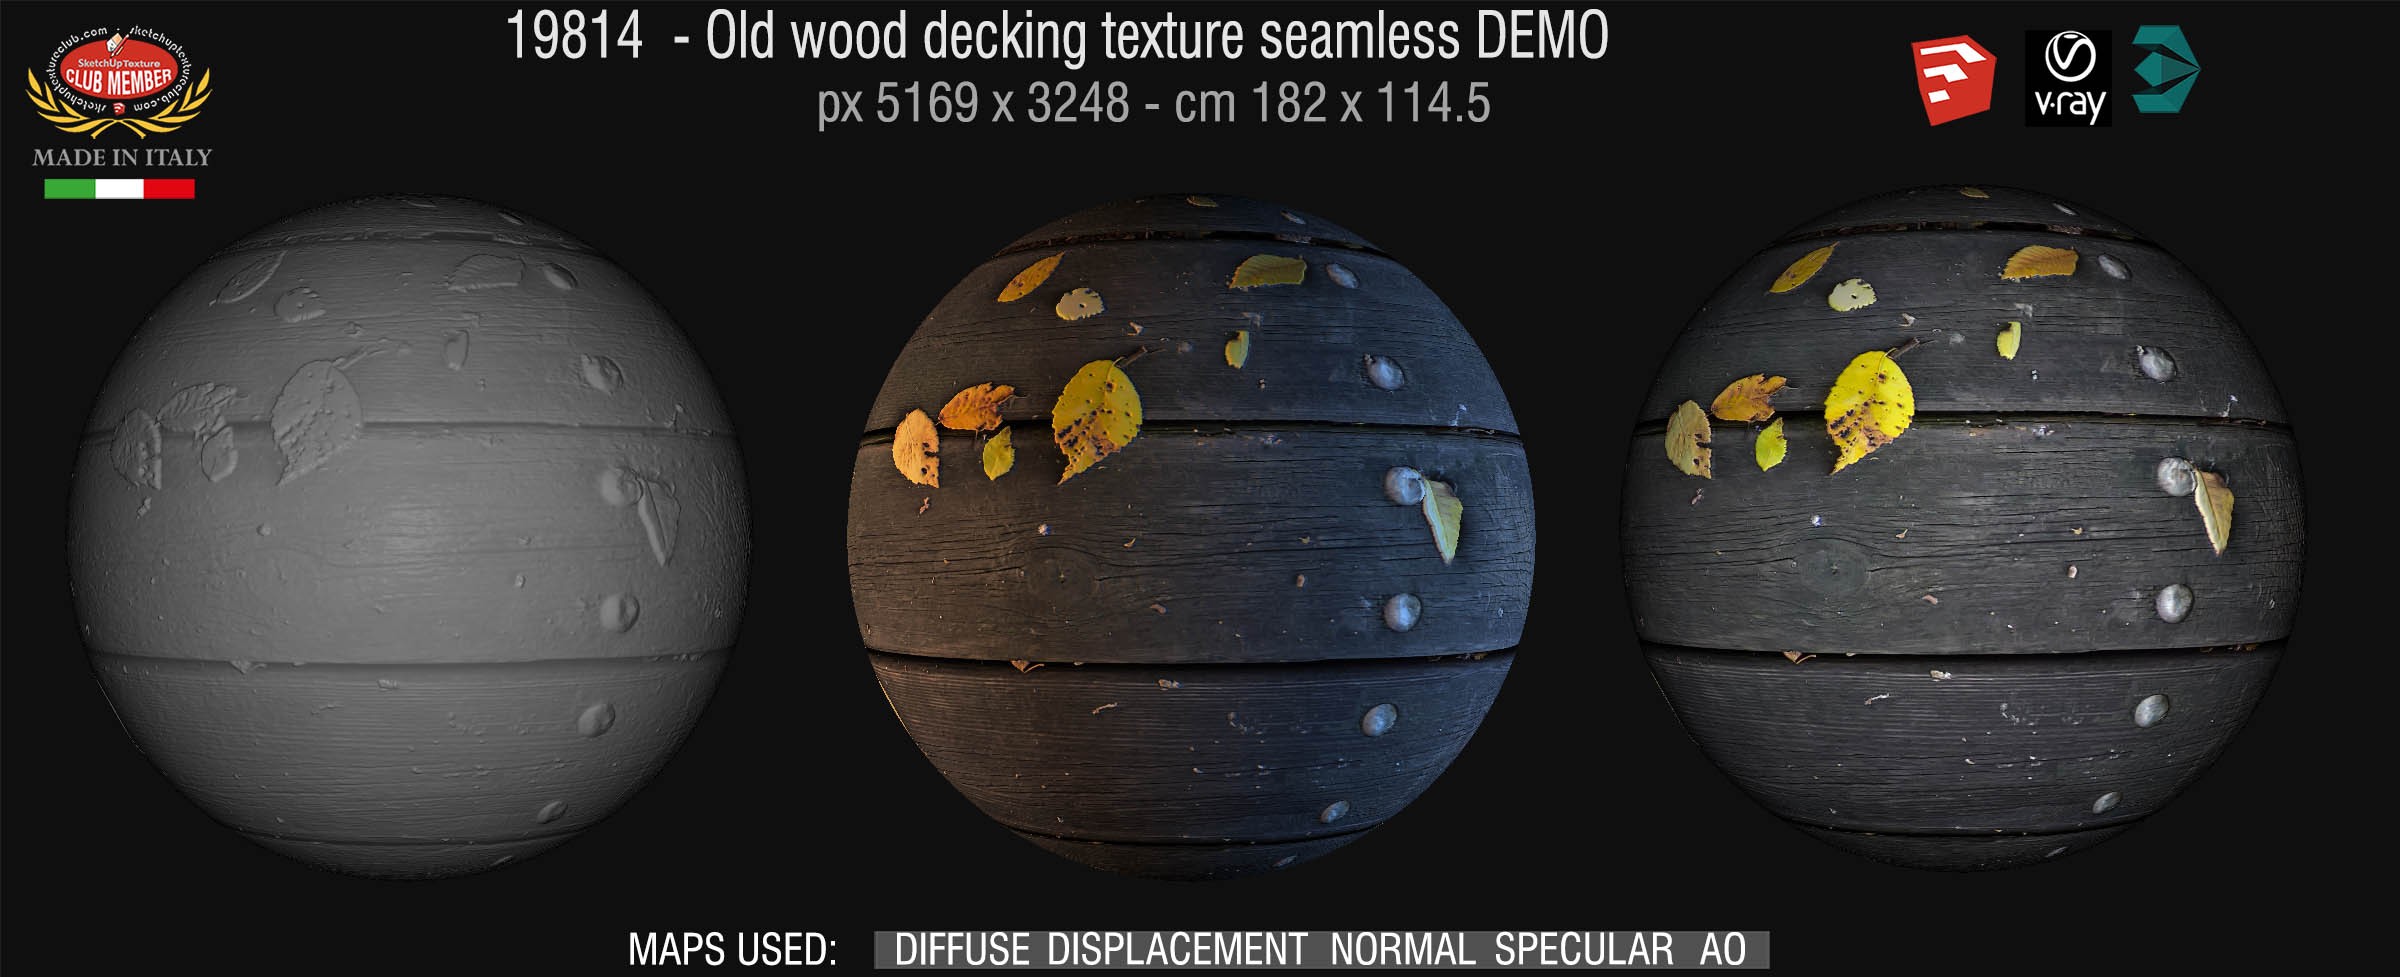 19814 HR Old wood decking texture seamless + maps DEMO